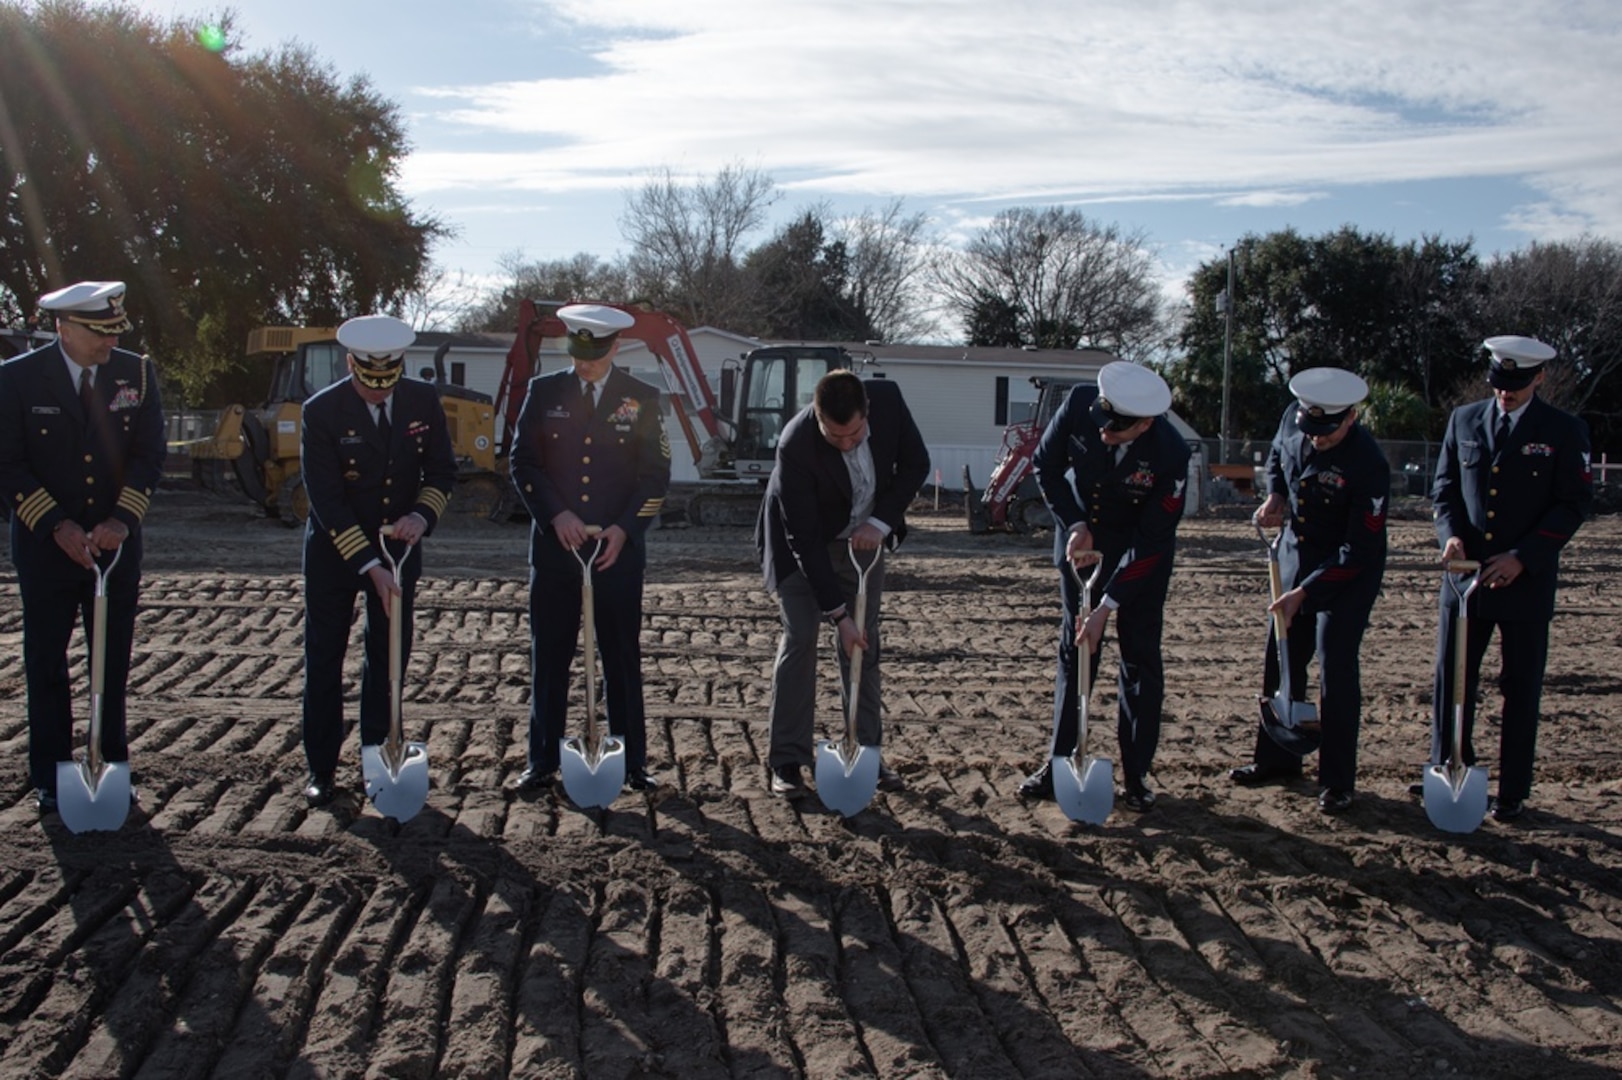 Coast Guard leadership from local units break ground for new construction during a groundbreaking ceremony at Coast Guard Station Tybee, Georgia, Jan. 12, 2022. The new building will be used for Station Tybee, Coast Guard Cutter Pompano, and Coast Guard Aids to Navigation Tybee Island to support their multiple missions. (U.S. Coast Guard photo by Petty Officer 1st Class David Micallef)